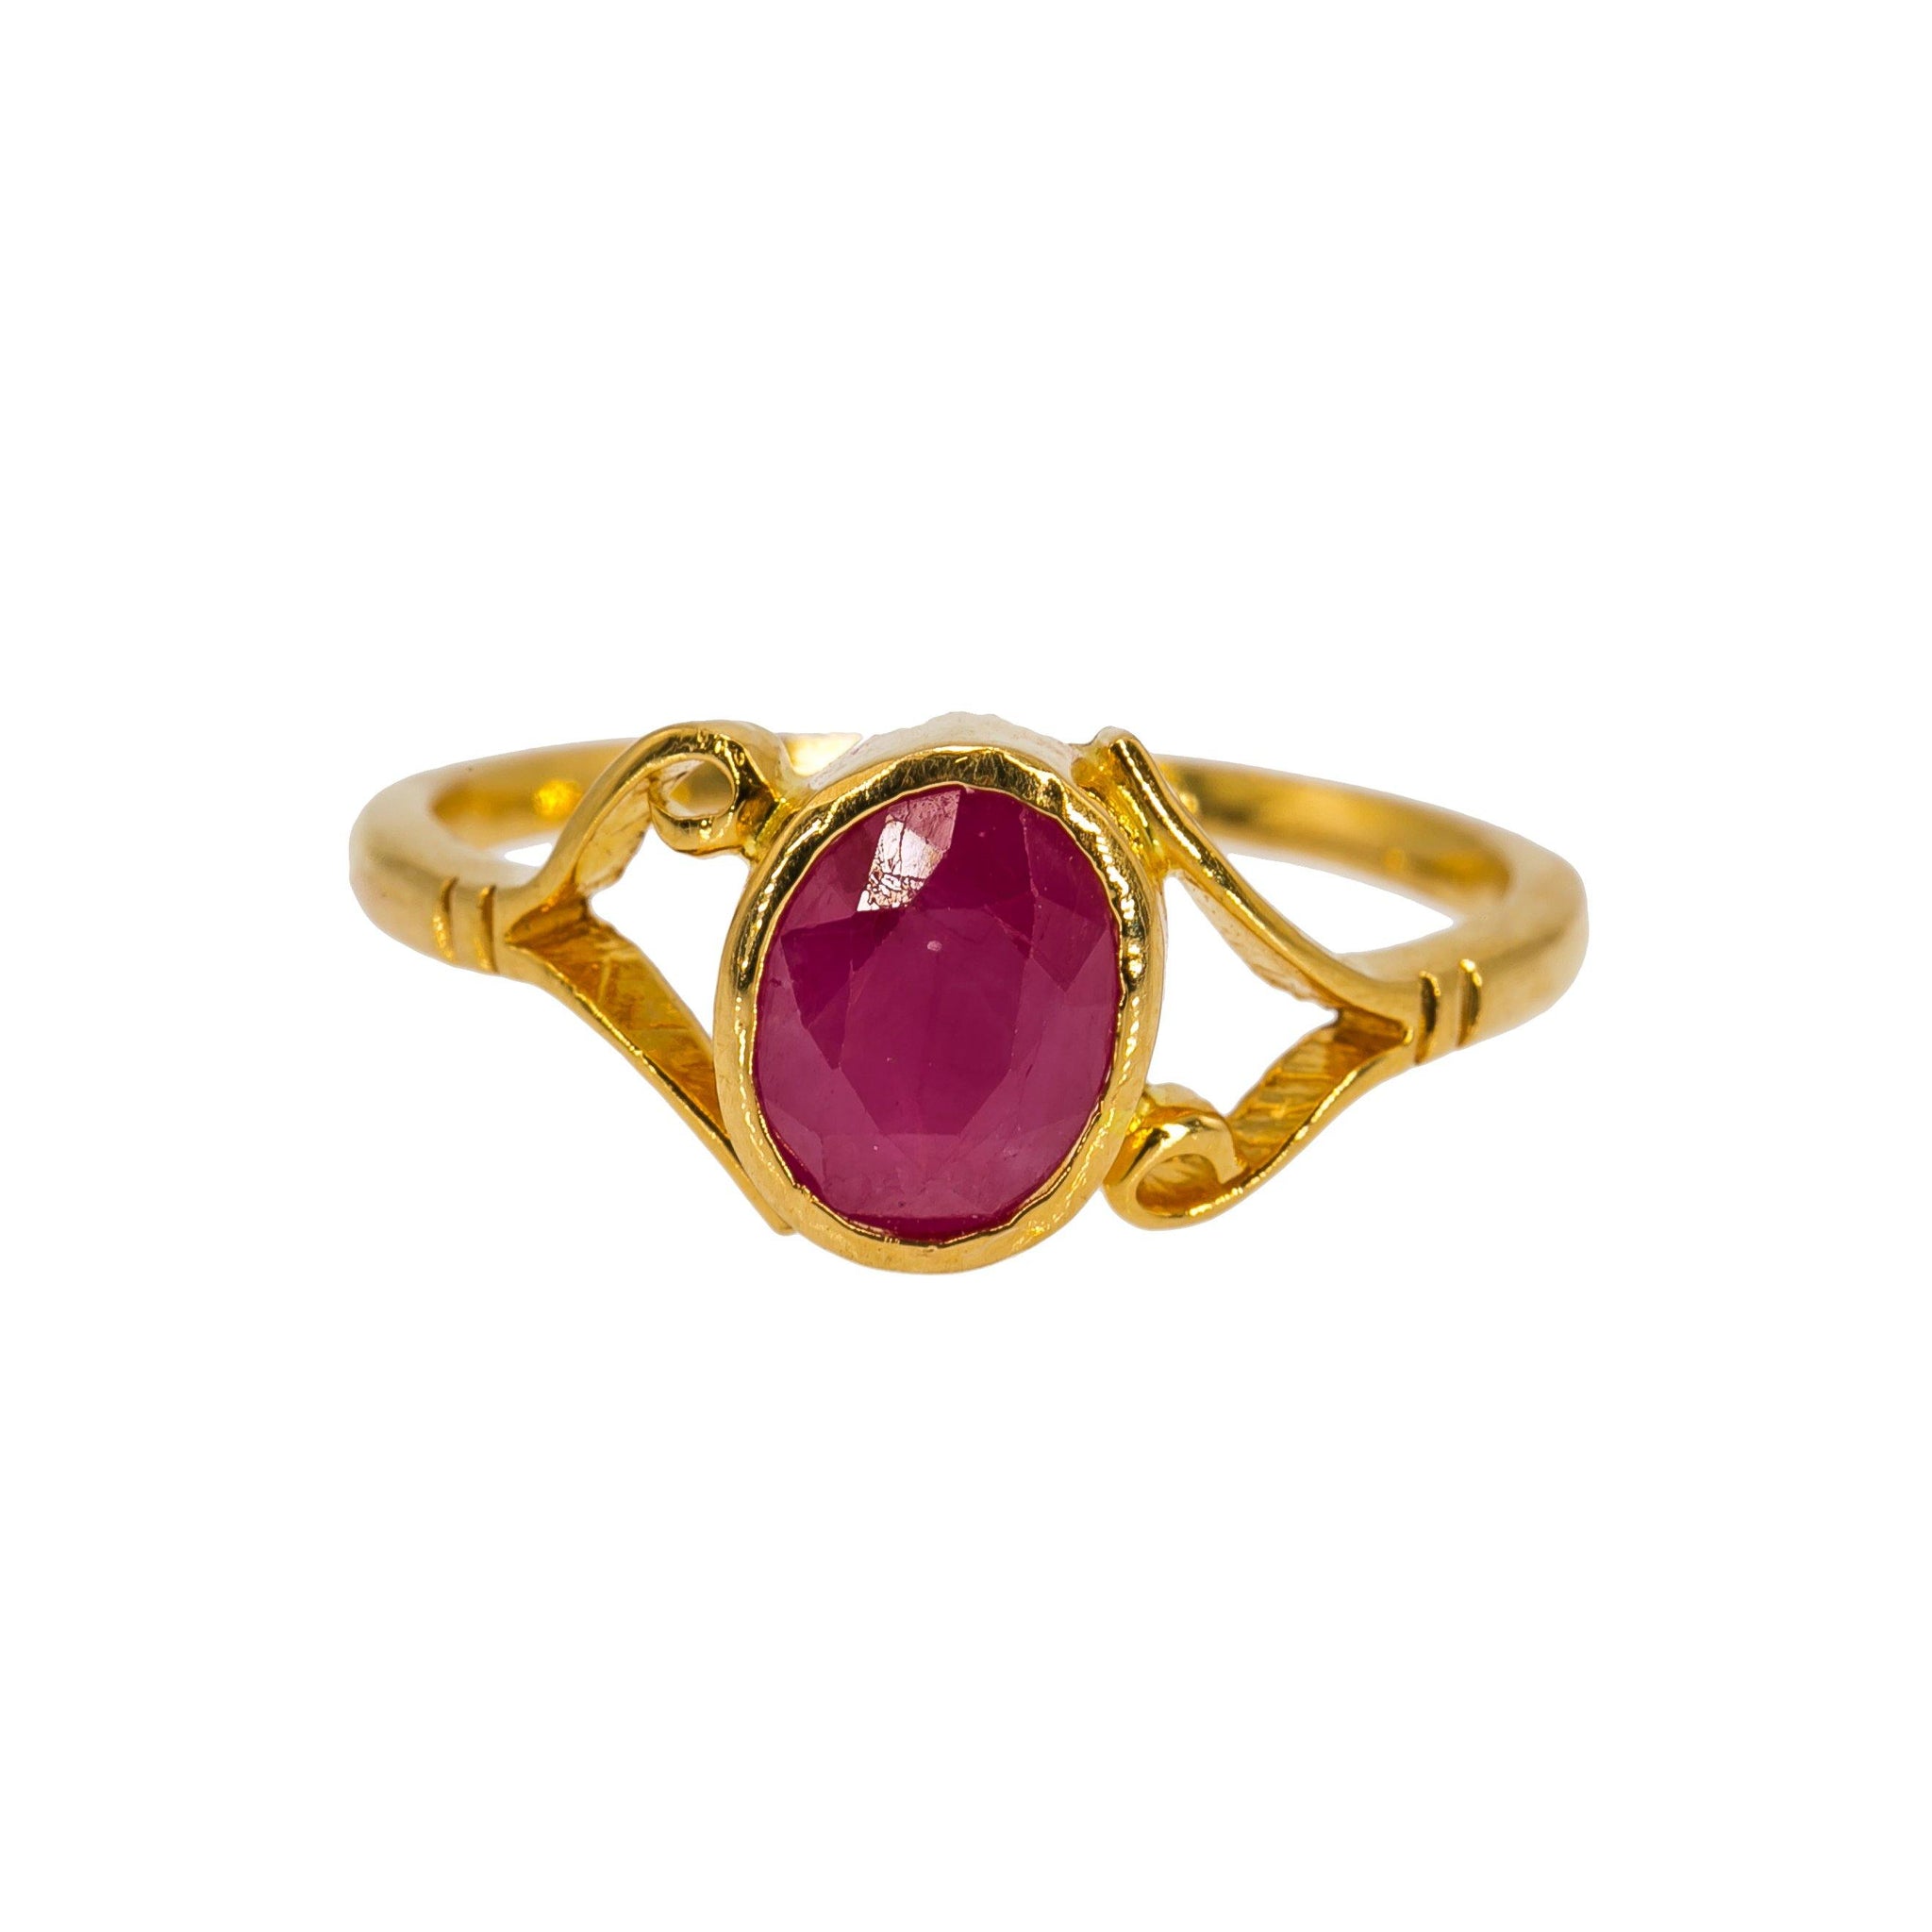 Mozambique Red Ruby Ring Gemstone Ring Gift For Her Wedding Ring Ruby  Jewelry | eBay